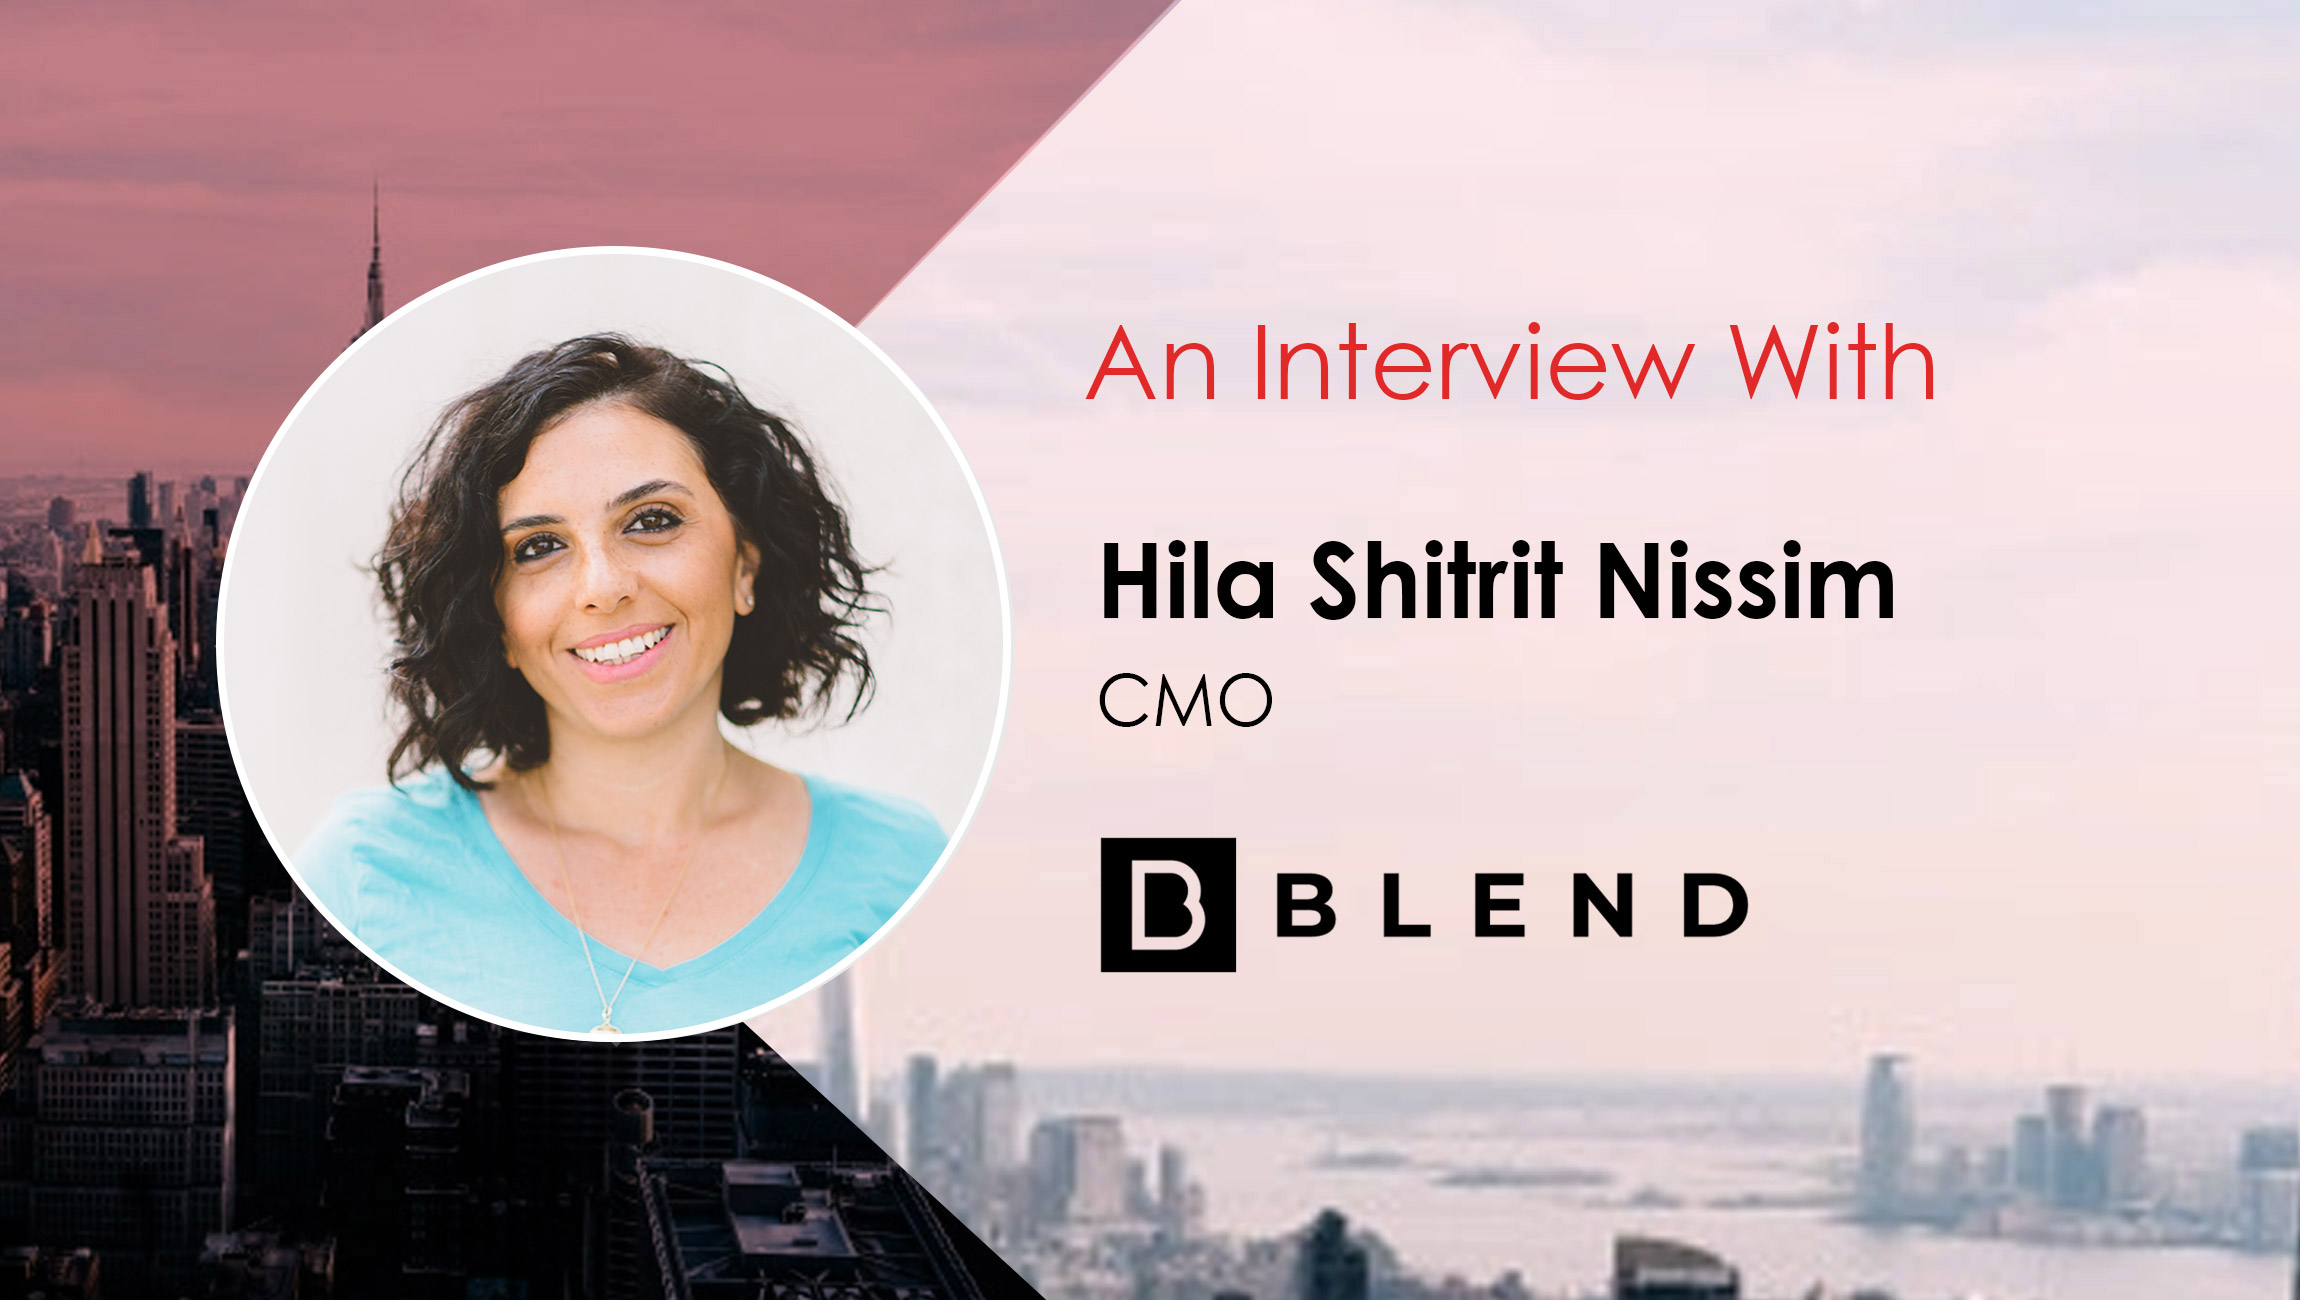 MarTech Interview with Hila Shitrit Nissim, CMO at BLEND